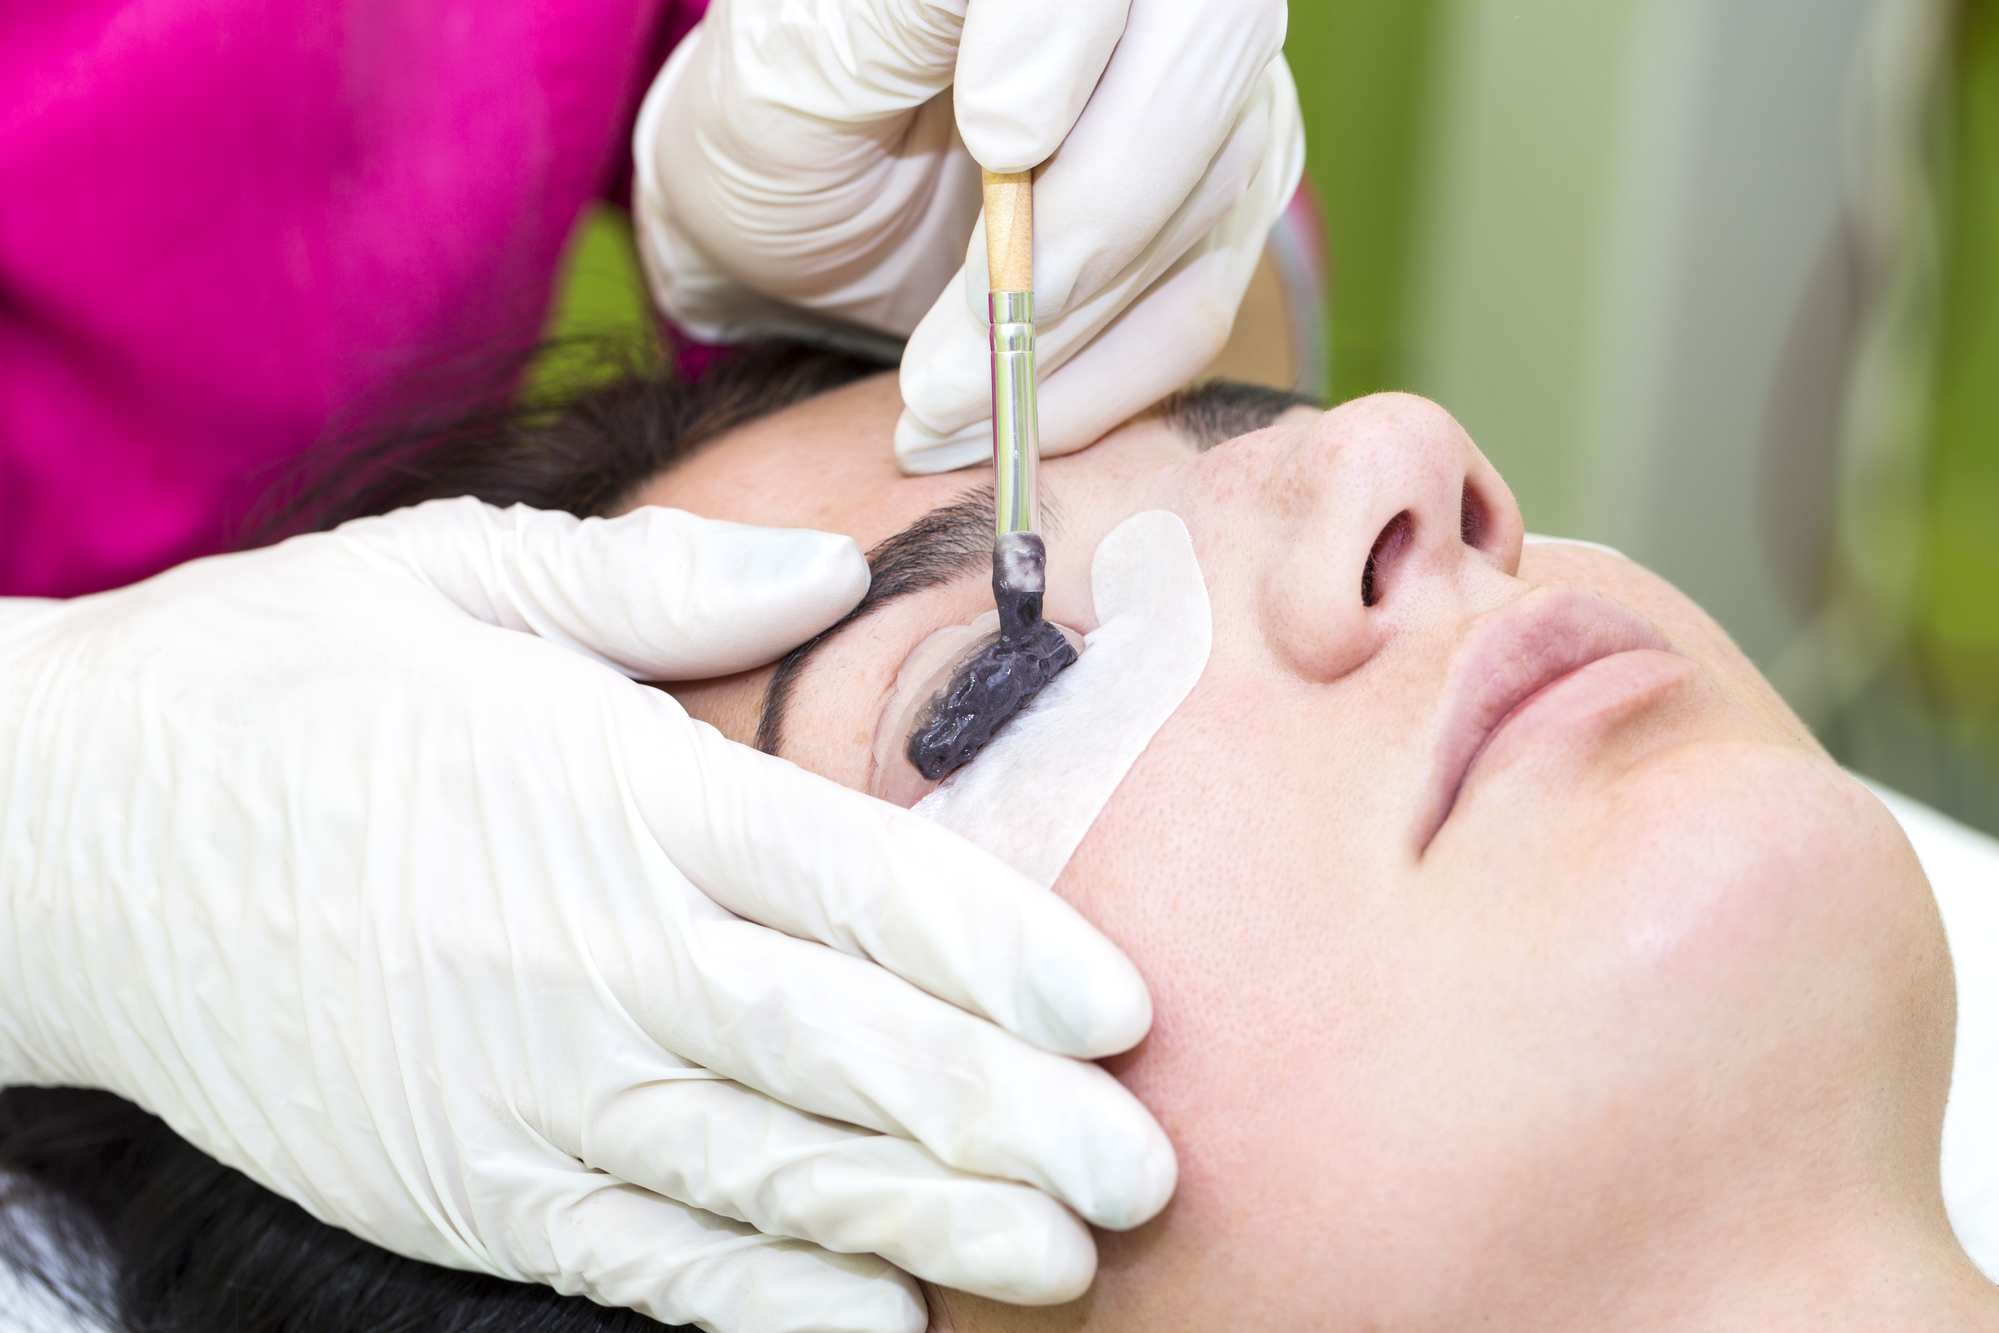 Maintaining the health and beauty of your natural lashes